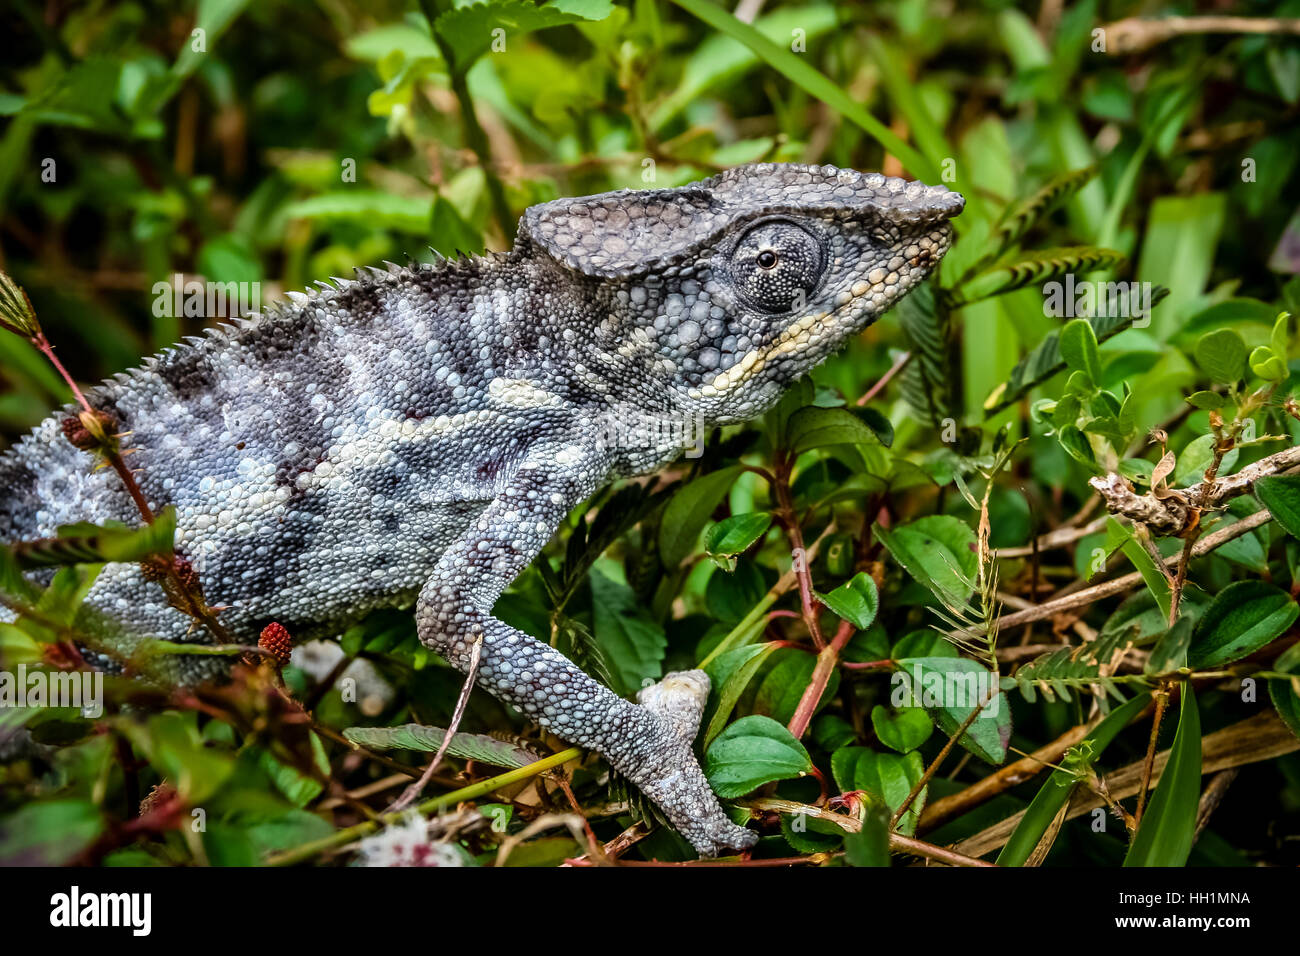 Small chameleon in the tropical madagascar rainforest Stock Photo